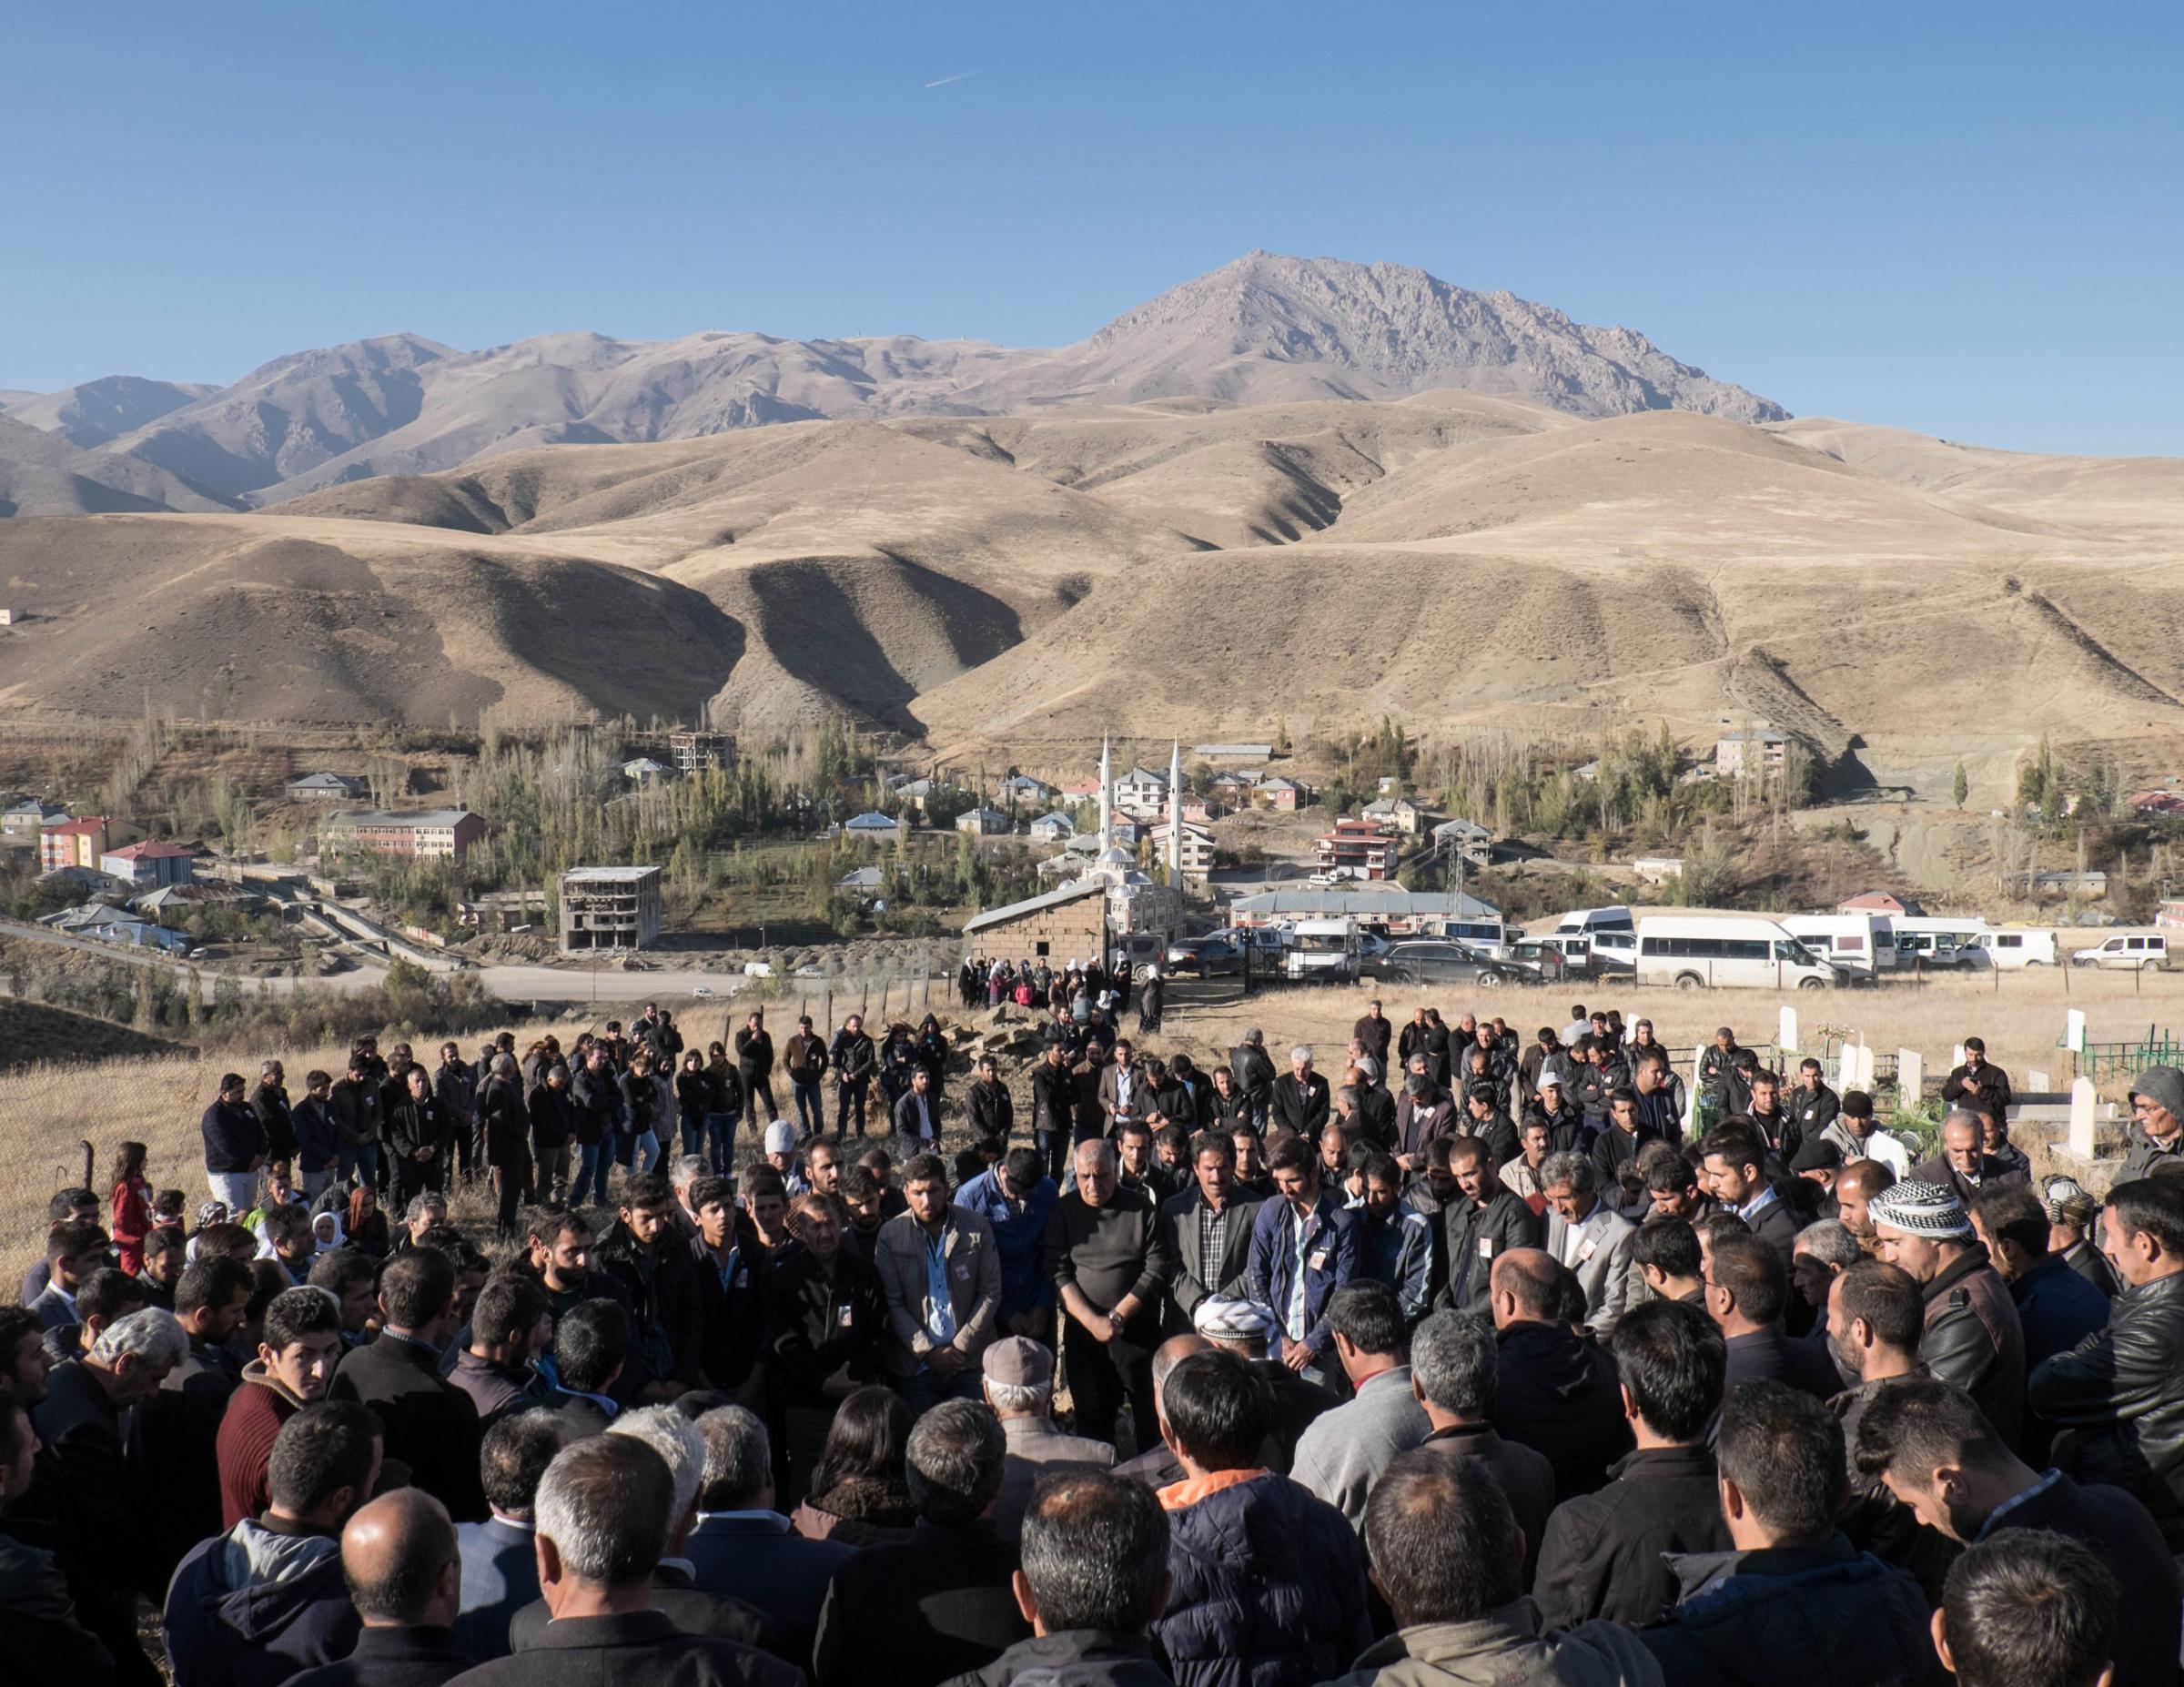 ESENDERE, TURKEY - NOVEMBER 04, 2015: The burial of Inan Tarsun, a PKK guerrilla died recently during a clash with the Turkish army on the Qandil mountains. Relatives and friends commemorate his death at the PKK grave yard in Esendere, a small town a the border with Iran in the Hakkari province. Since July the region has seen a surge in violence with daily clashes between the Turkish army and the militants from the outlawed Kurdistan Workers Party (PKK). The escalation has shattered a two-year ceasefire that had raised hopes of an end to three decades of fighting, in which more than 40,000 people have been killed.